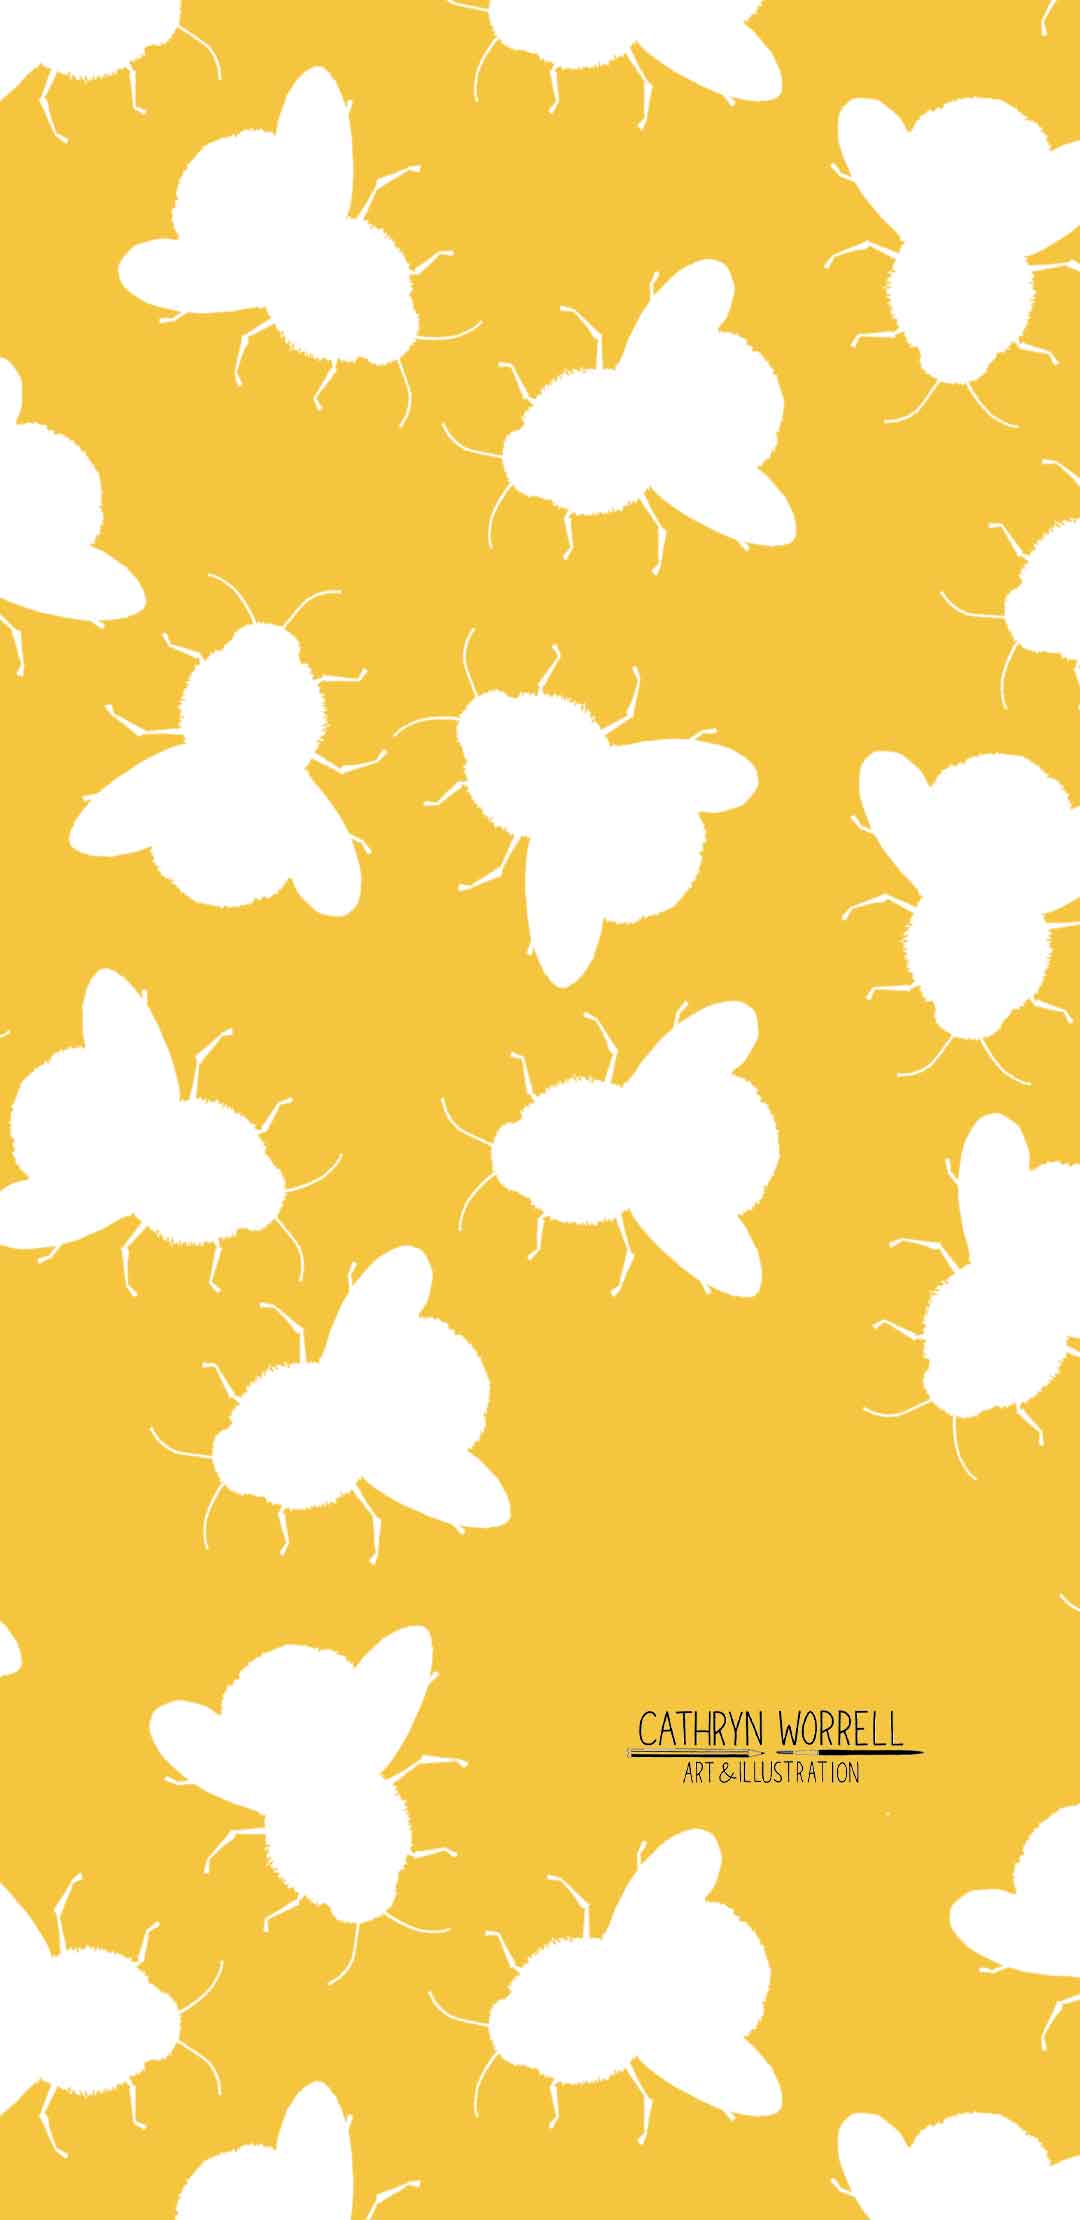 Bumble bee phone wallpaper for August — Cathryn Worrell Art & Illustration